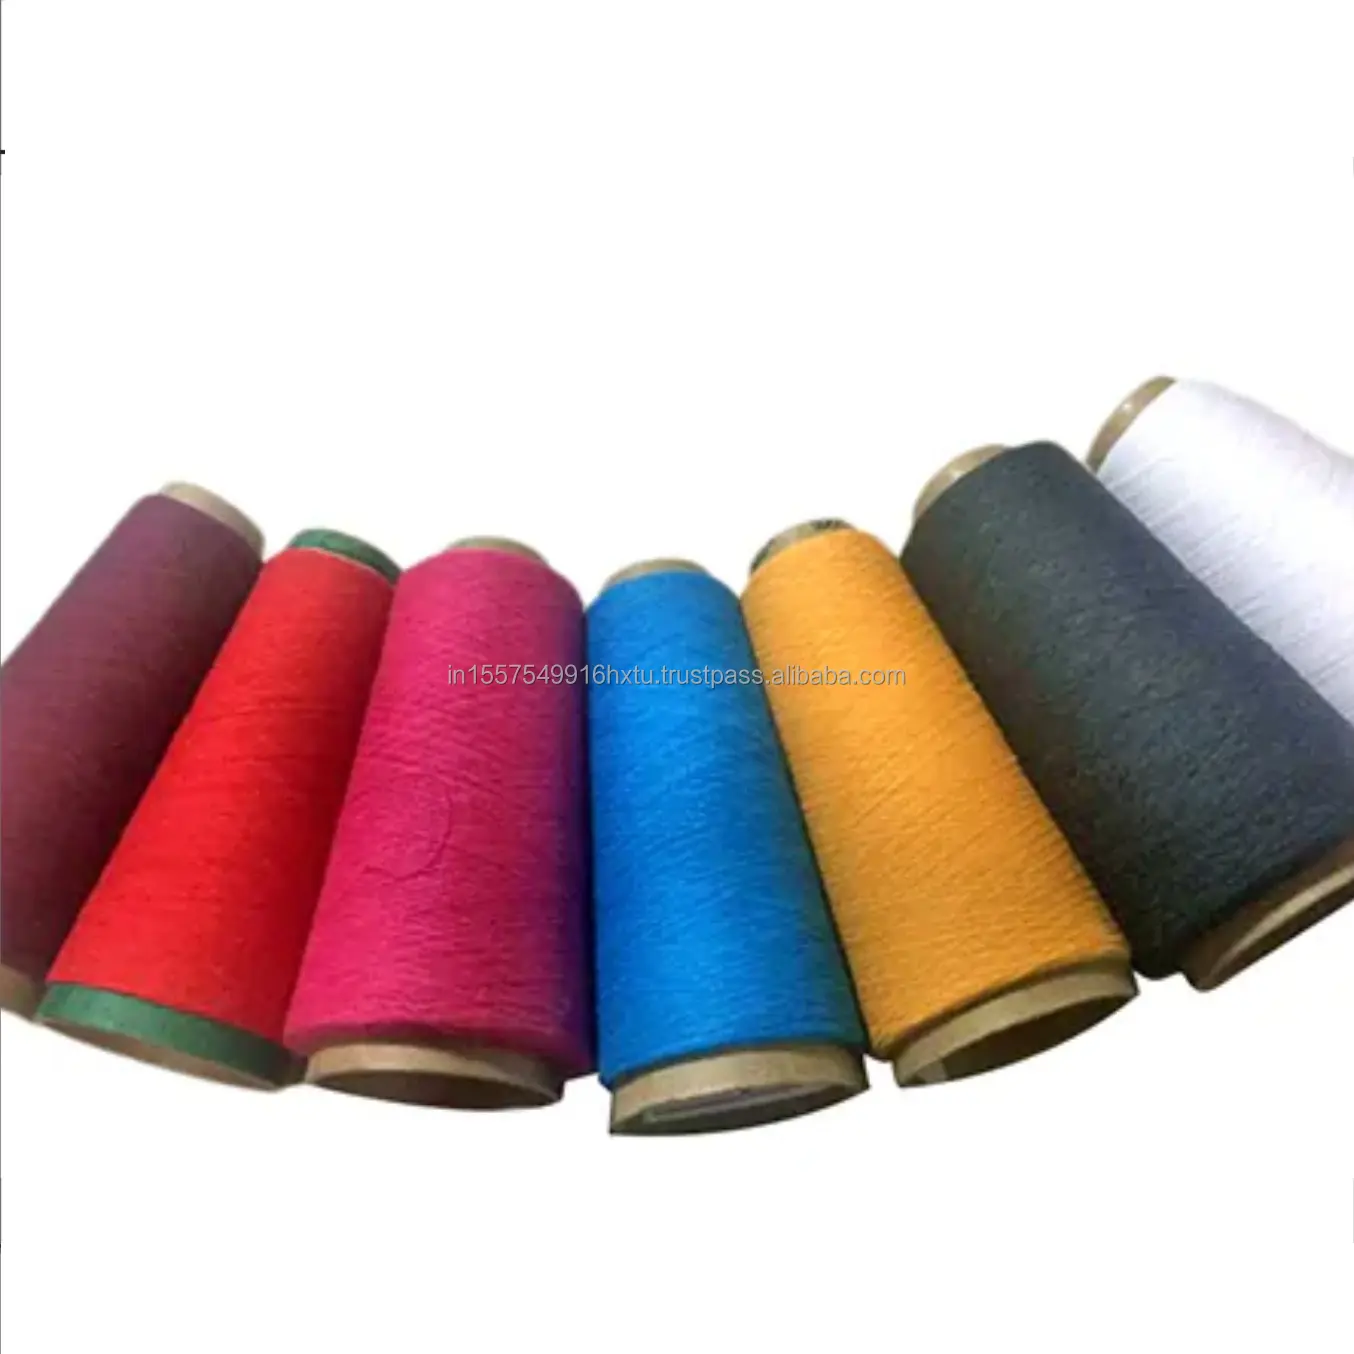 NE 16s/1 80% Cotton 20% Polyester recycled coloured yarn PP bag packing with quality strength of yarn raw materials